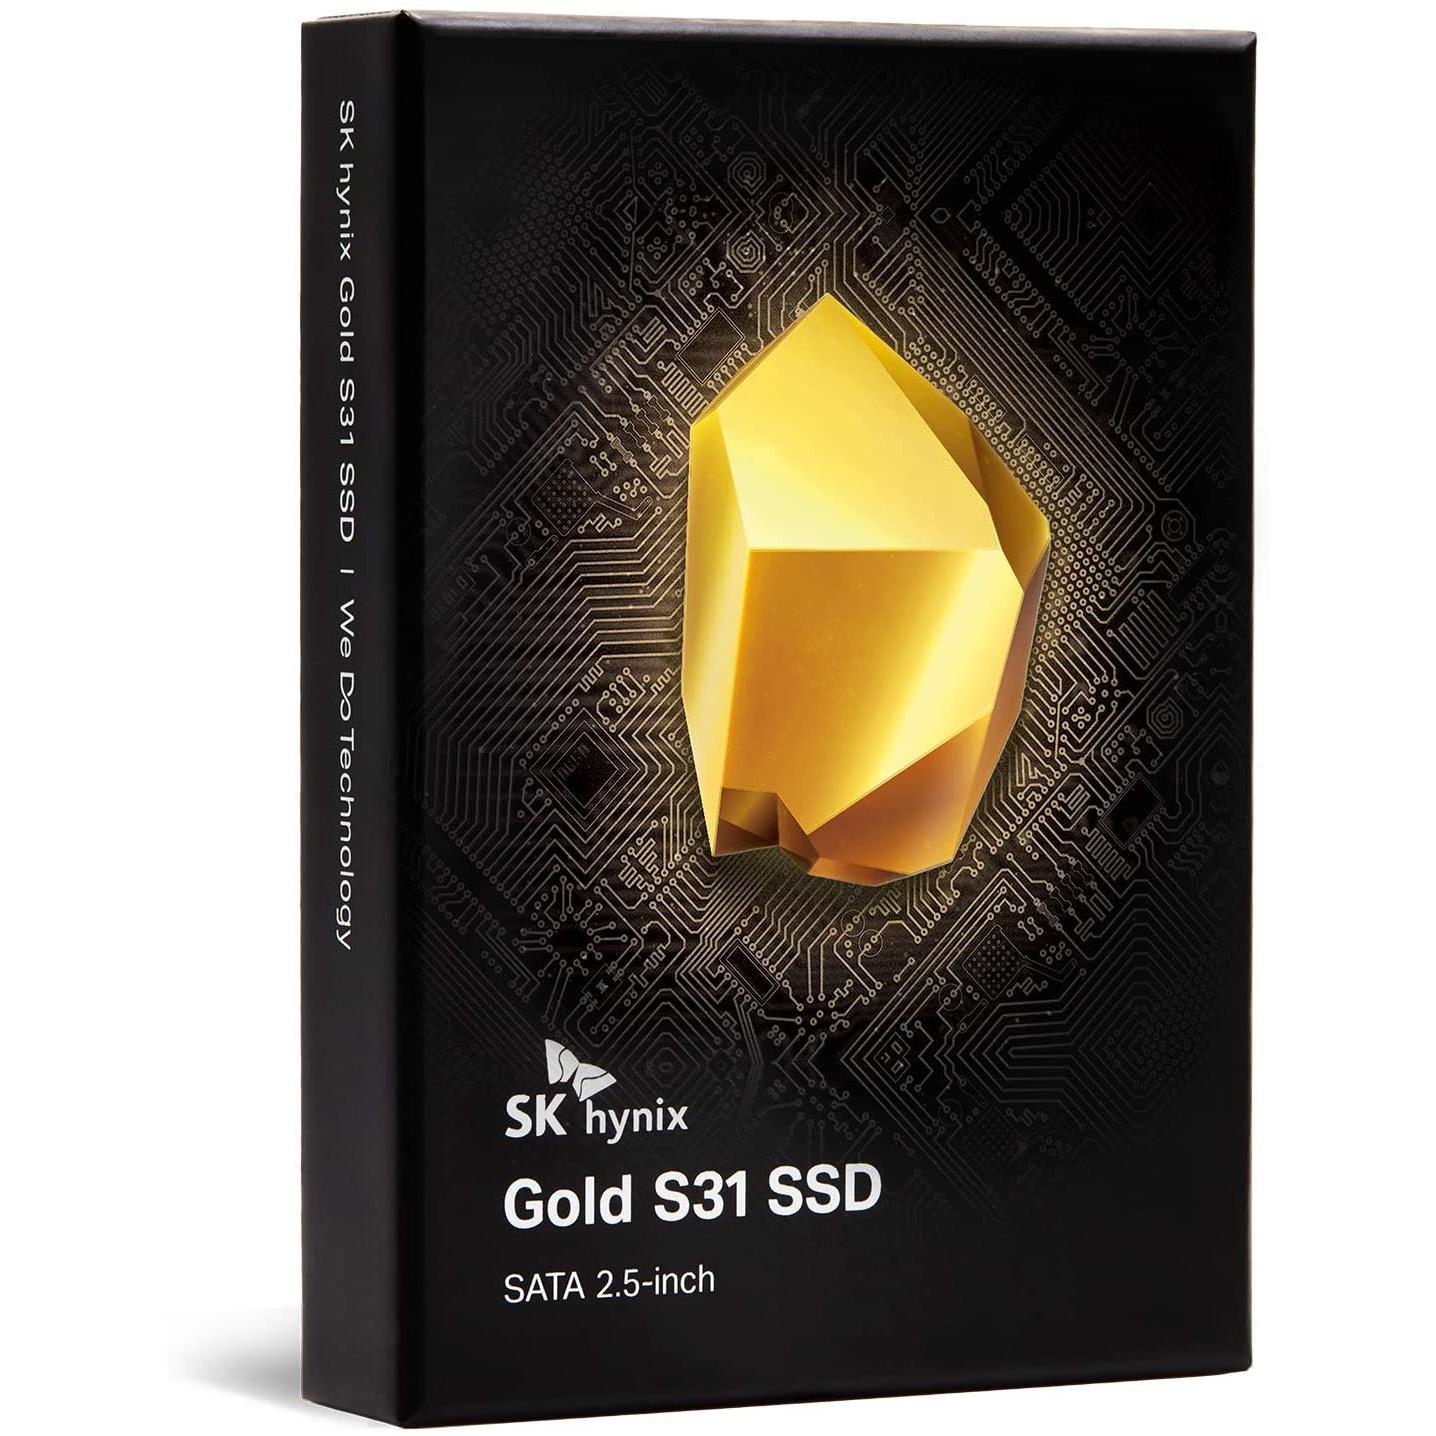 SK hynix Gold S31 500GB SATA SSD for $48.79 Shipped